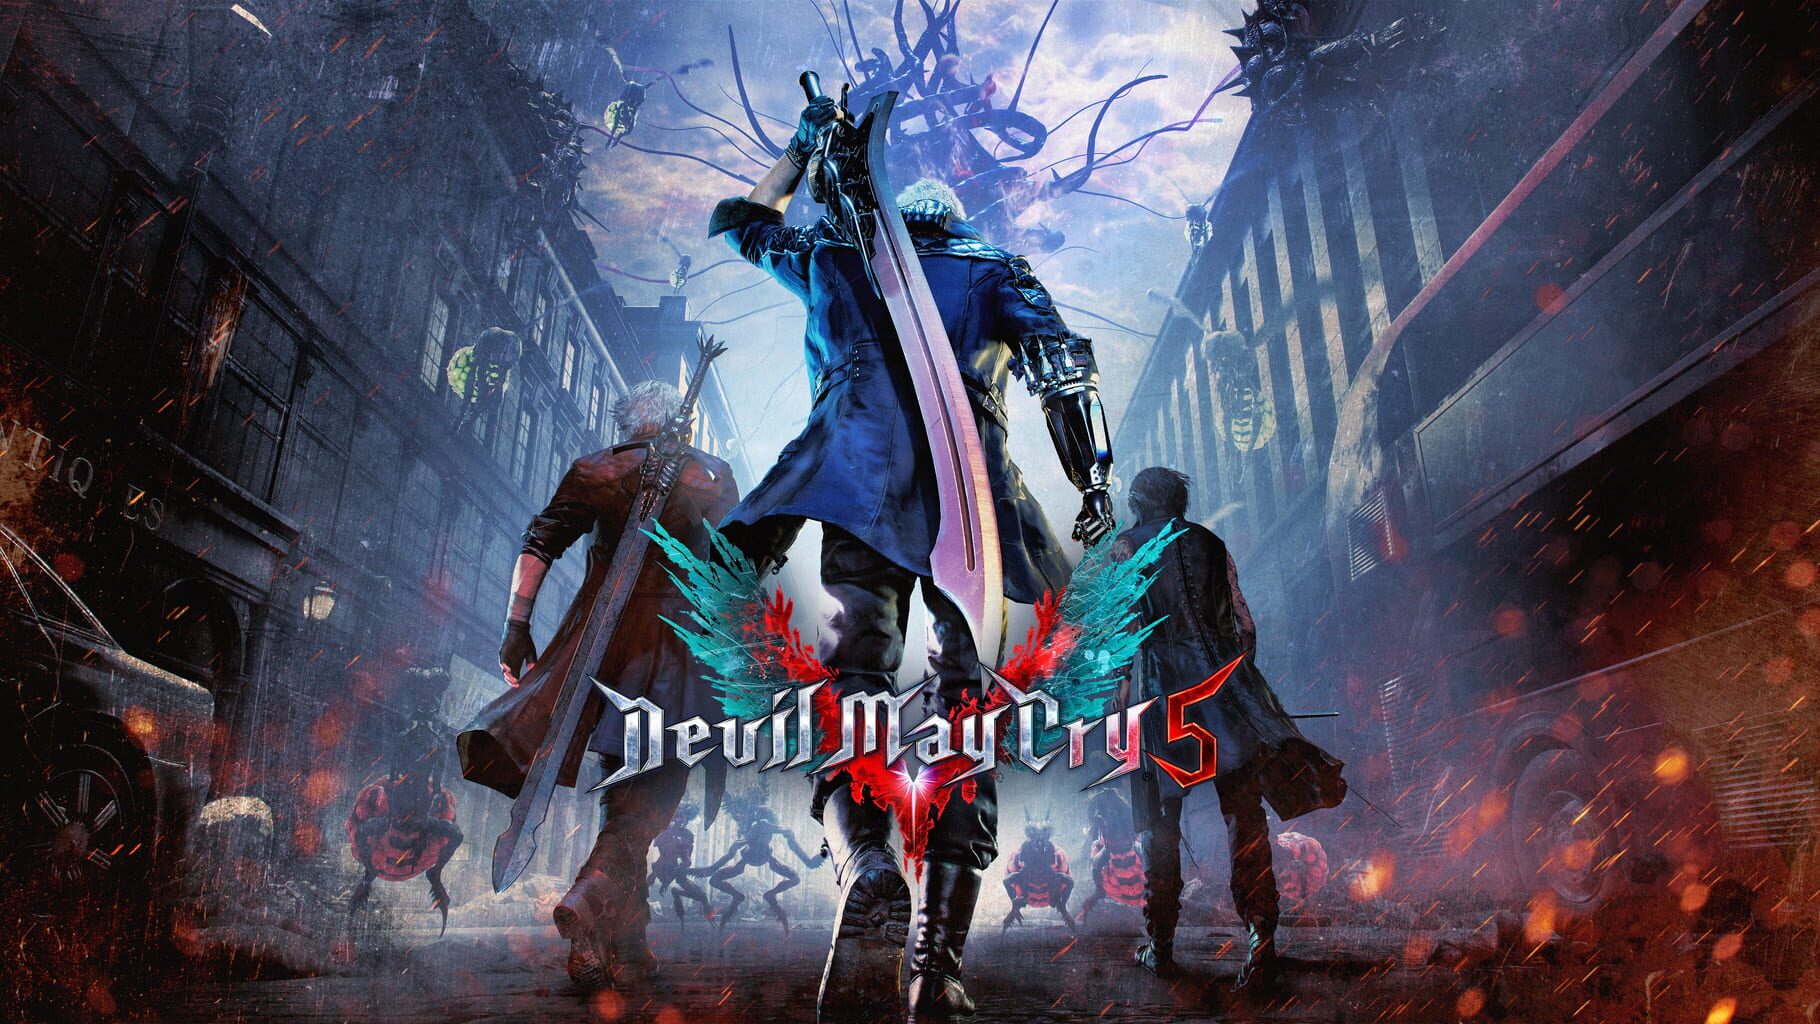 Artwork for Devil May Cry 5